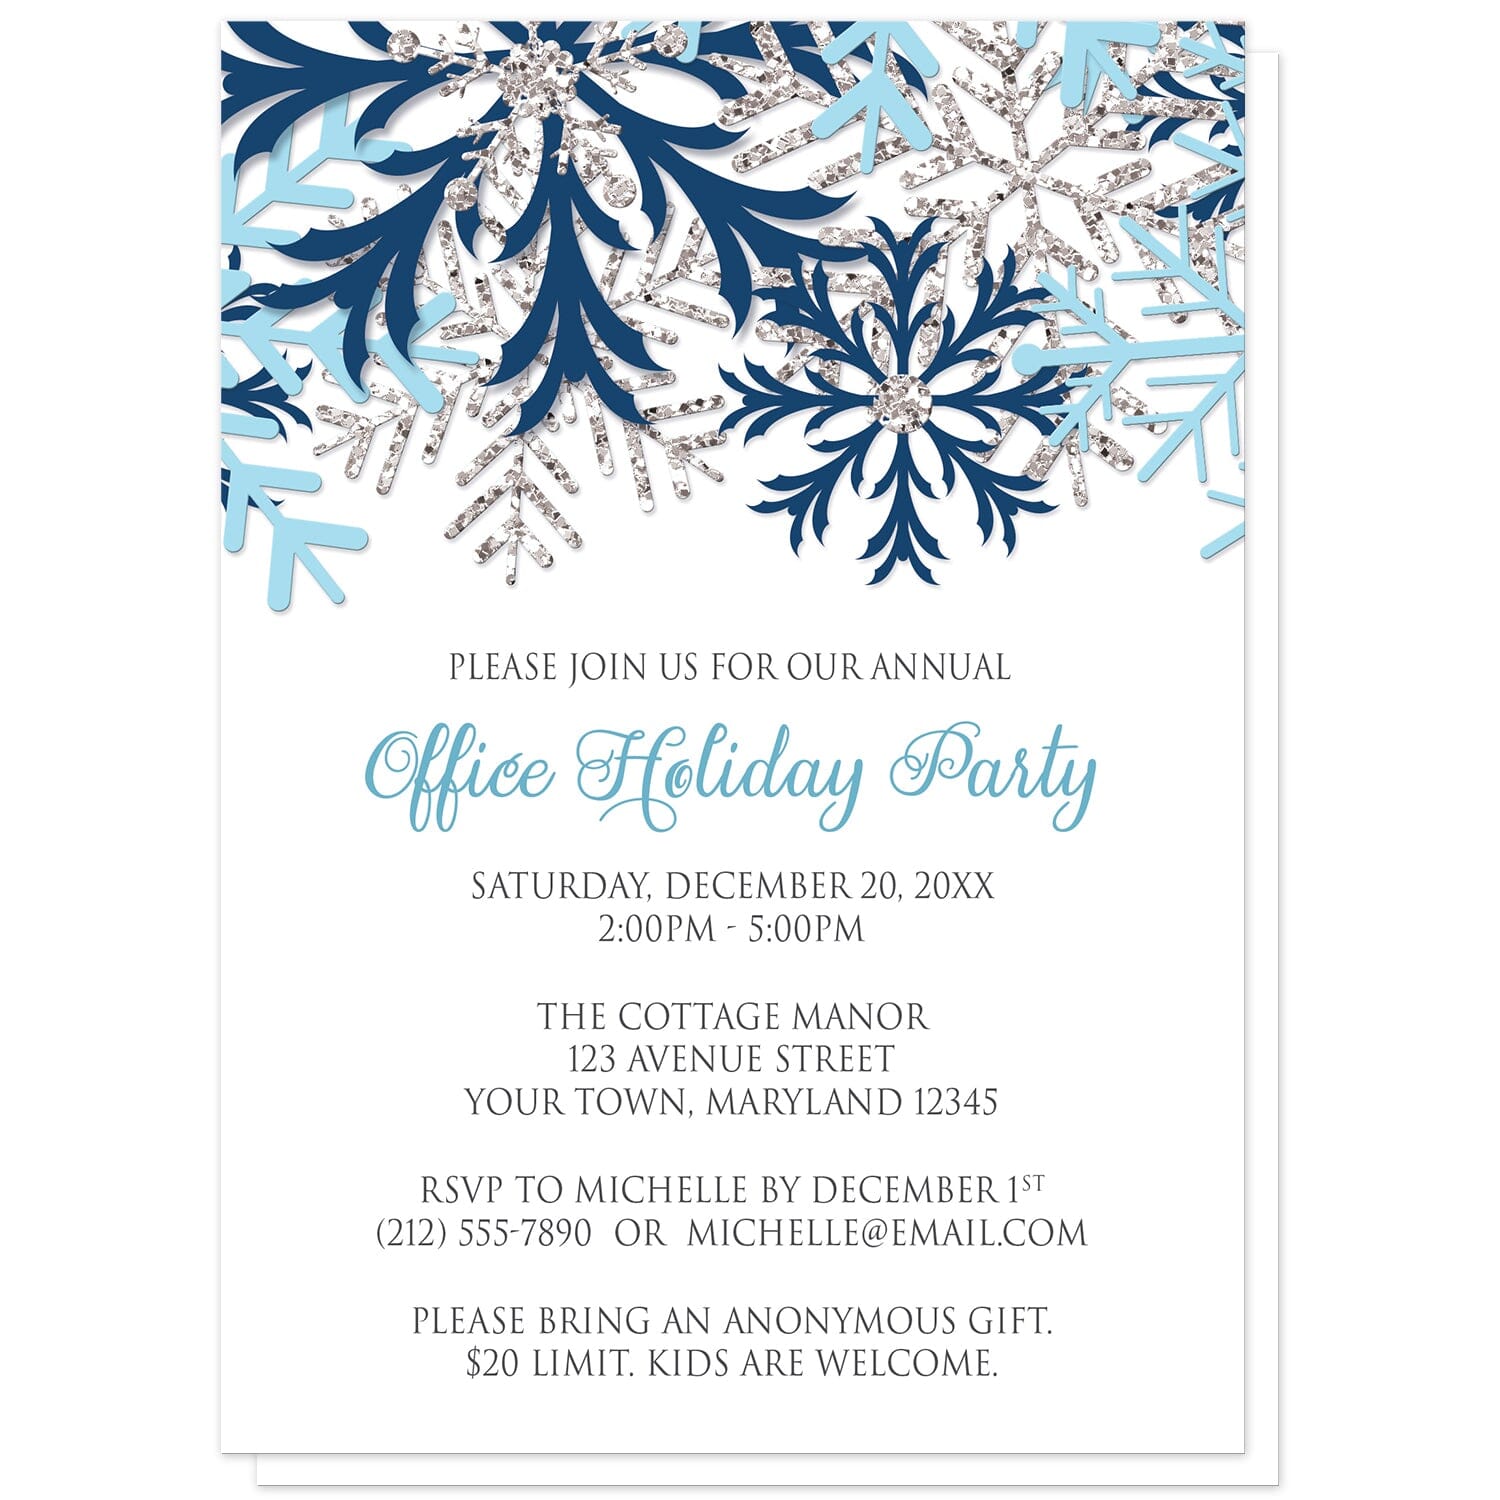 Winter Blue Silver Snowflake Holiday Party Invitations at Artistically Invited. Winter blue silver snowflake holiday party invitations with navy blue, aqua blue, and silver-colored glitter-illustrated snowflakes over a white background. Your personalized party details for your home or office party are custom printed in gray and blue. The occasion title is printed in a whimsical blue script font while your remaining details are printed in an all-capital letters gray serif font.